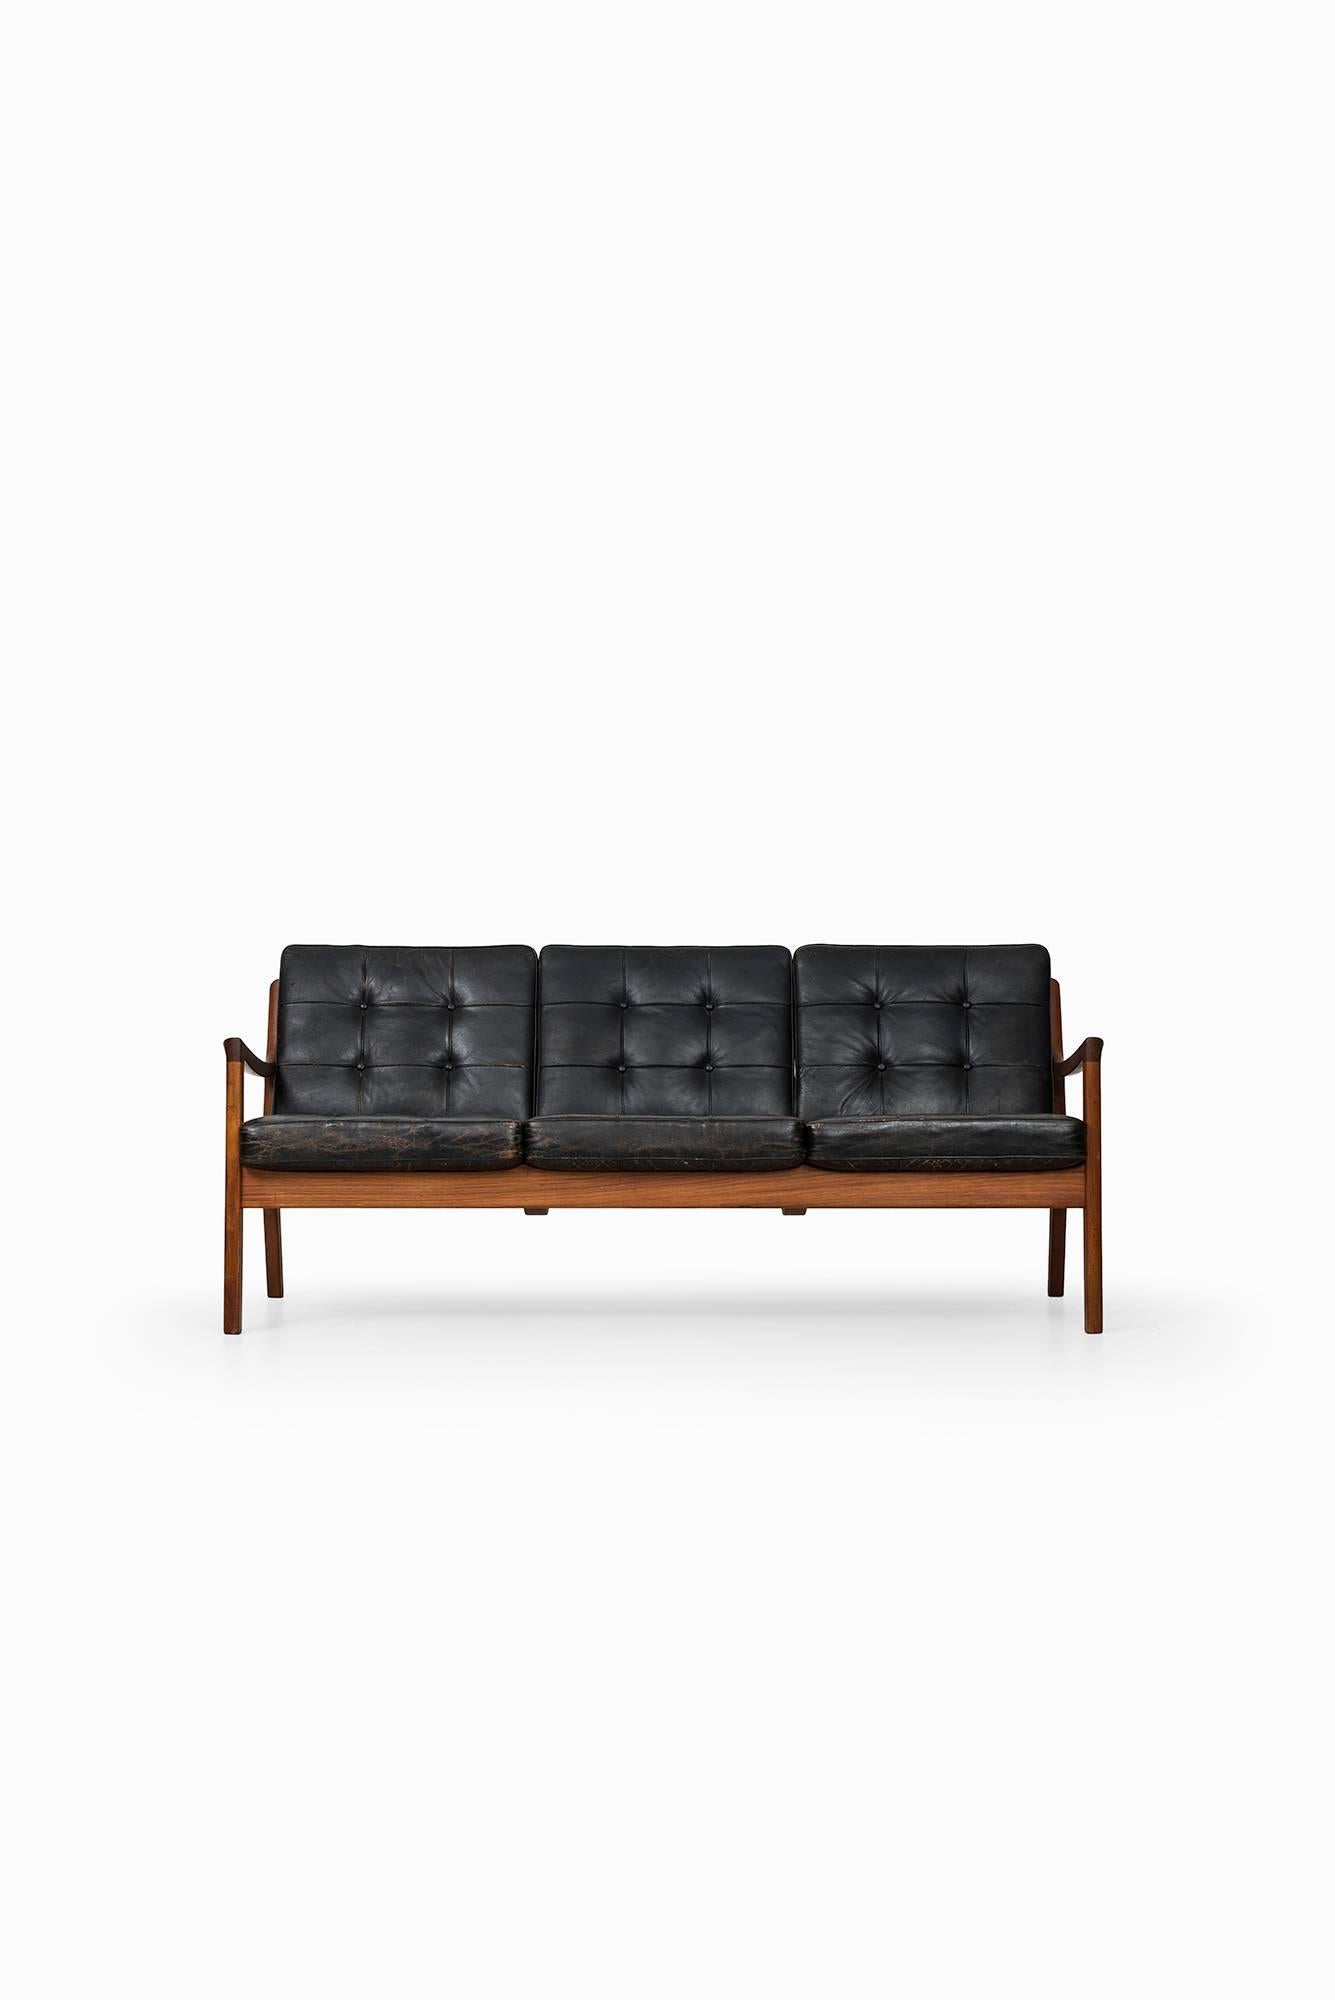 Rare sofa model 116 / Senator designed by Ole Wanscher. Produced by France & Son in Denmark.